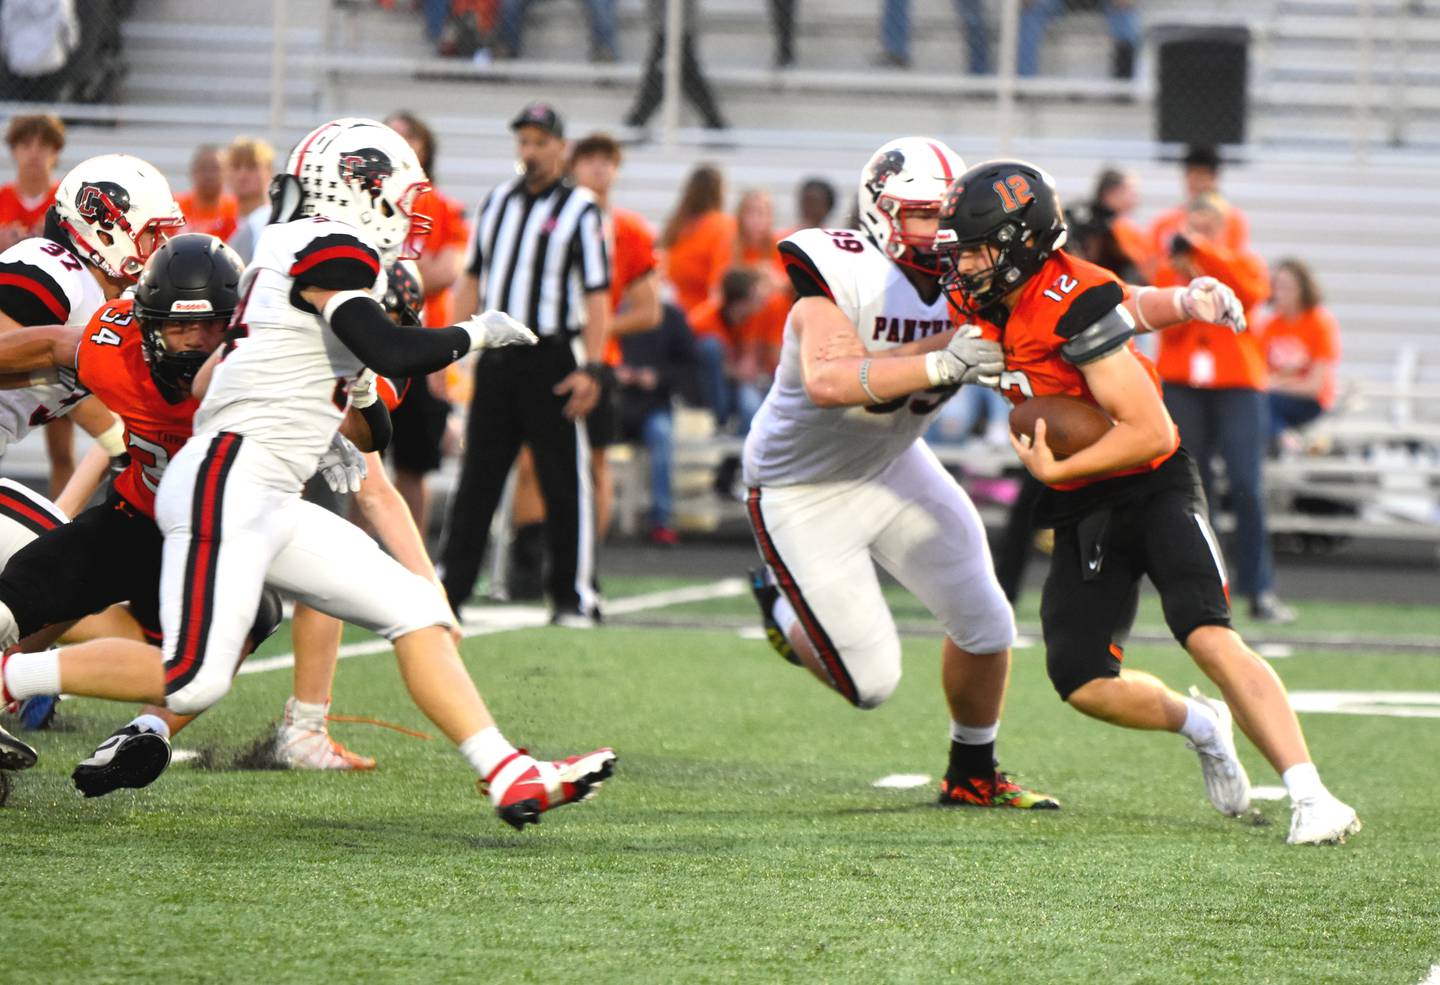 Creston's Max Chapman (No. 99) gets a tackle on Carroll quarterback Carter Essick while Milo Staver (No. 34) gets around a block to come in for the assist. Chapman had six solo tackles including four tackles for loss.